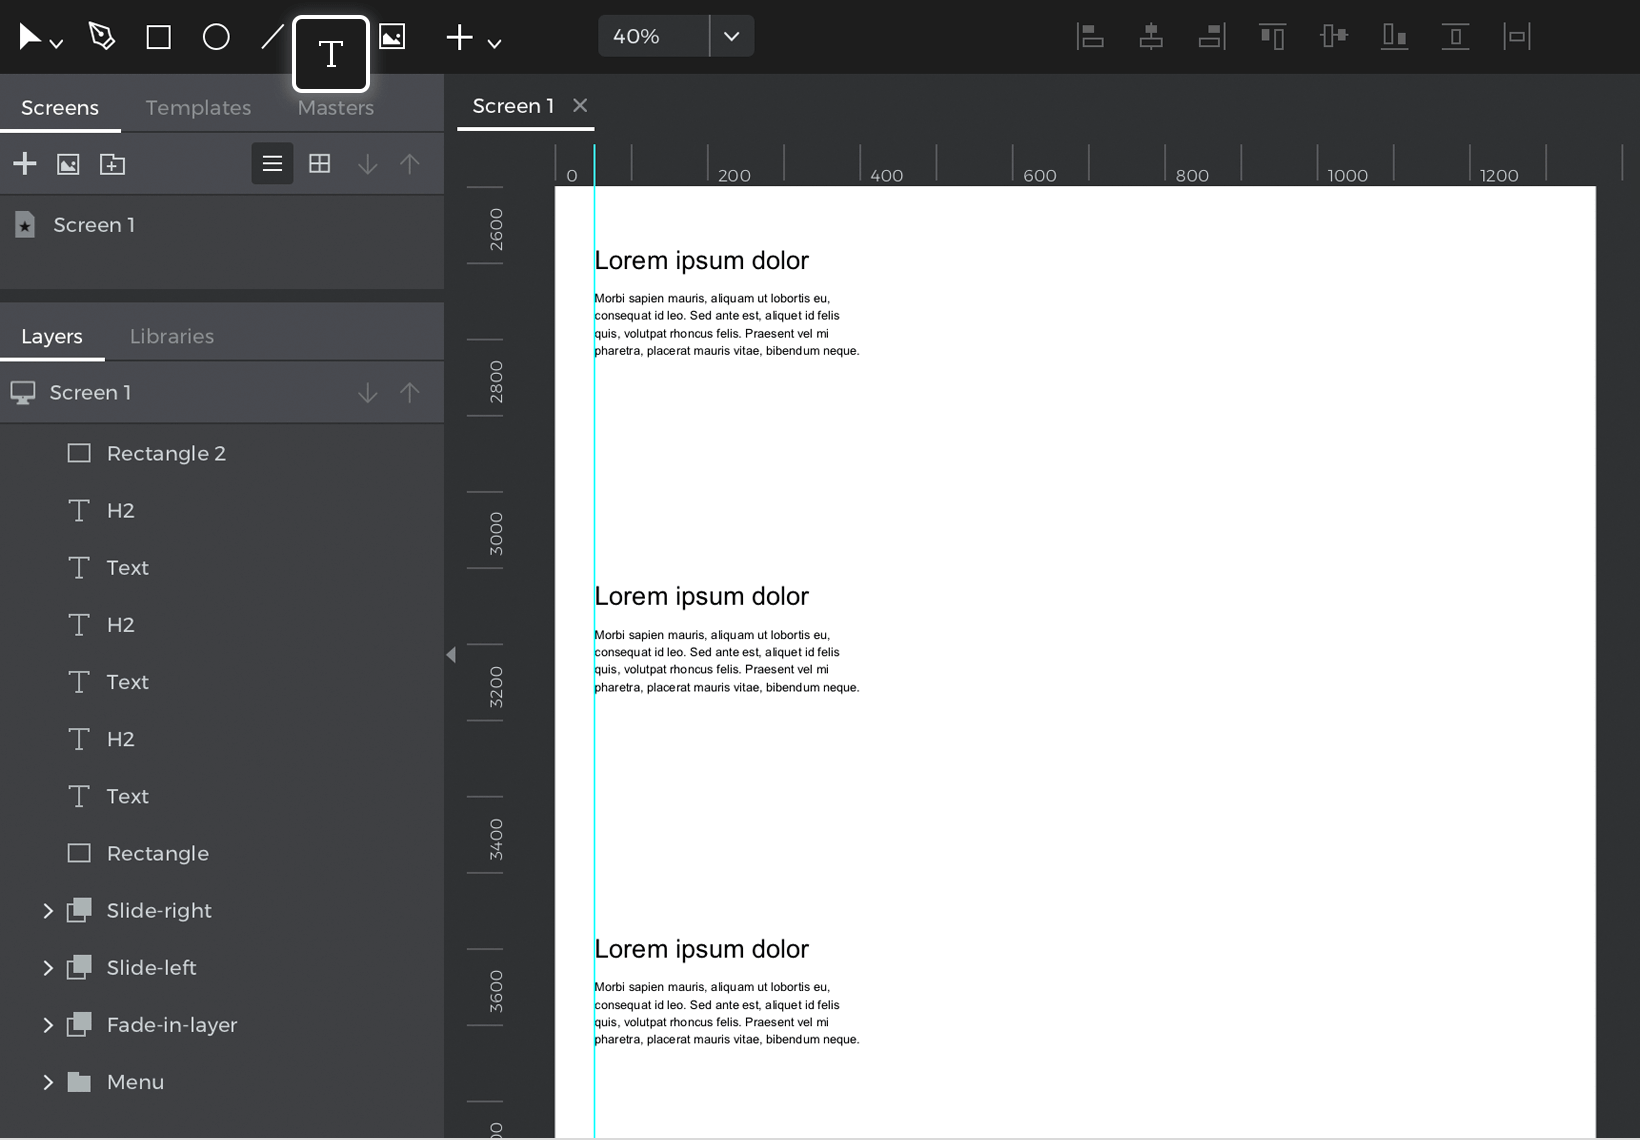 Place text elements on the canvas and distribute them